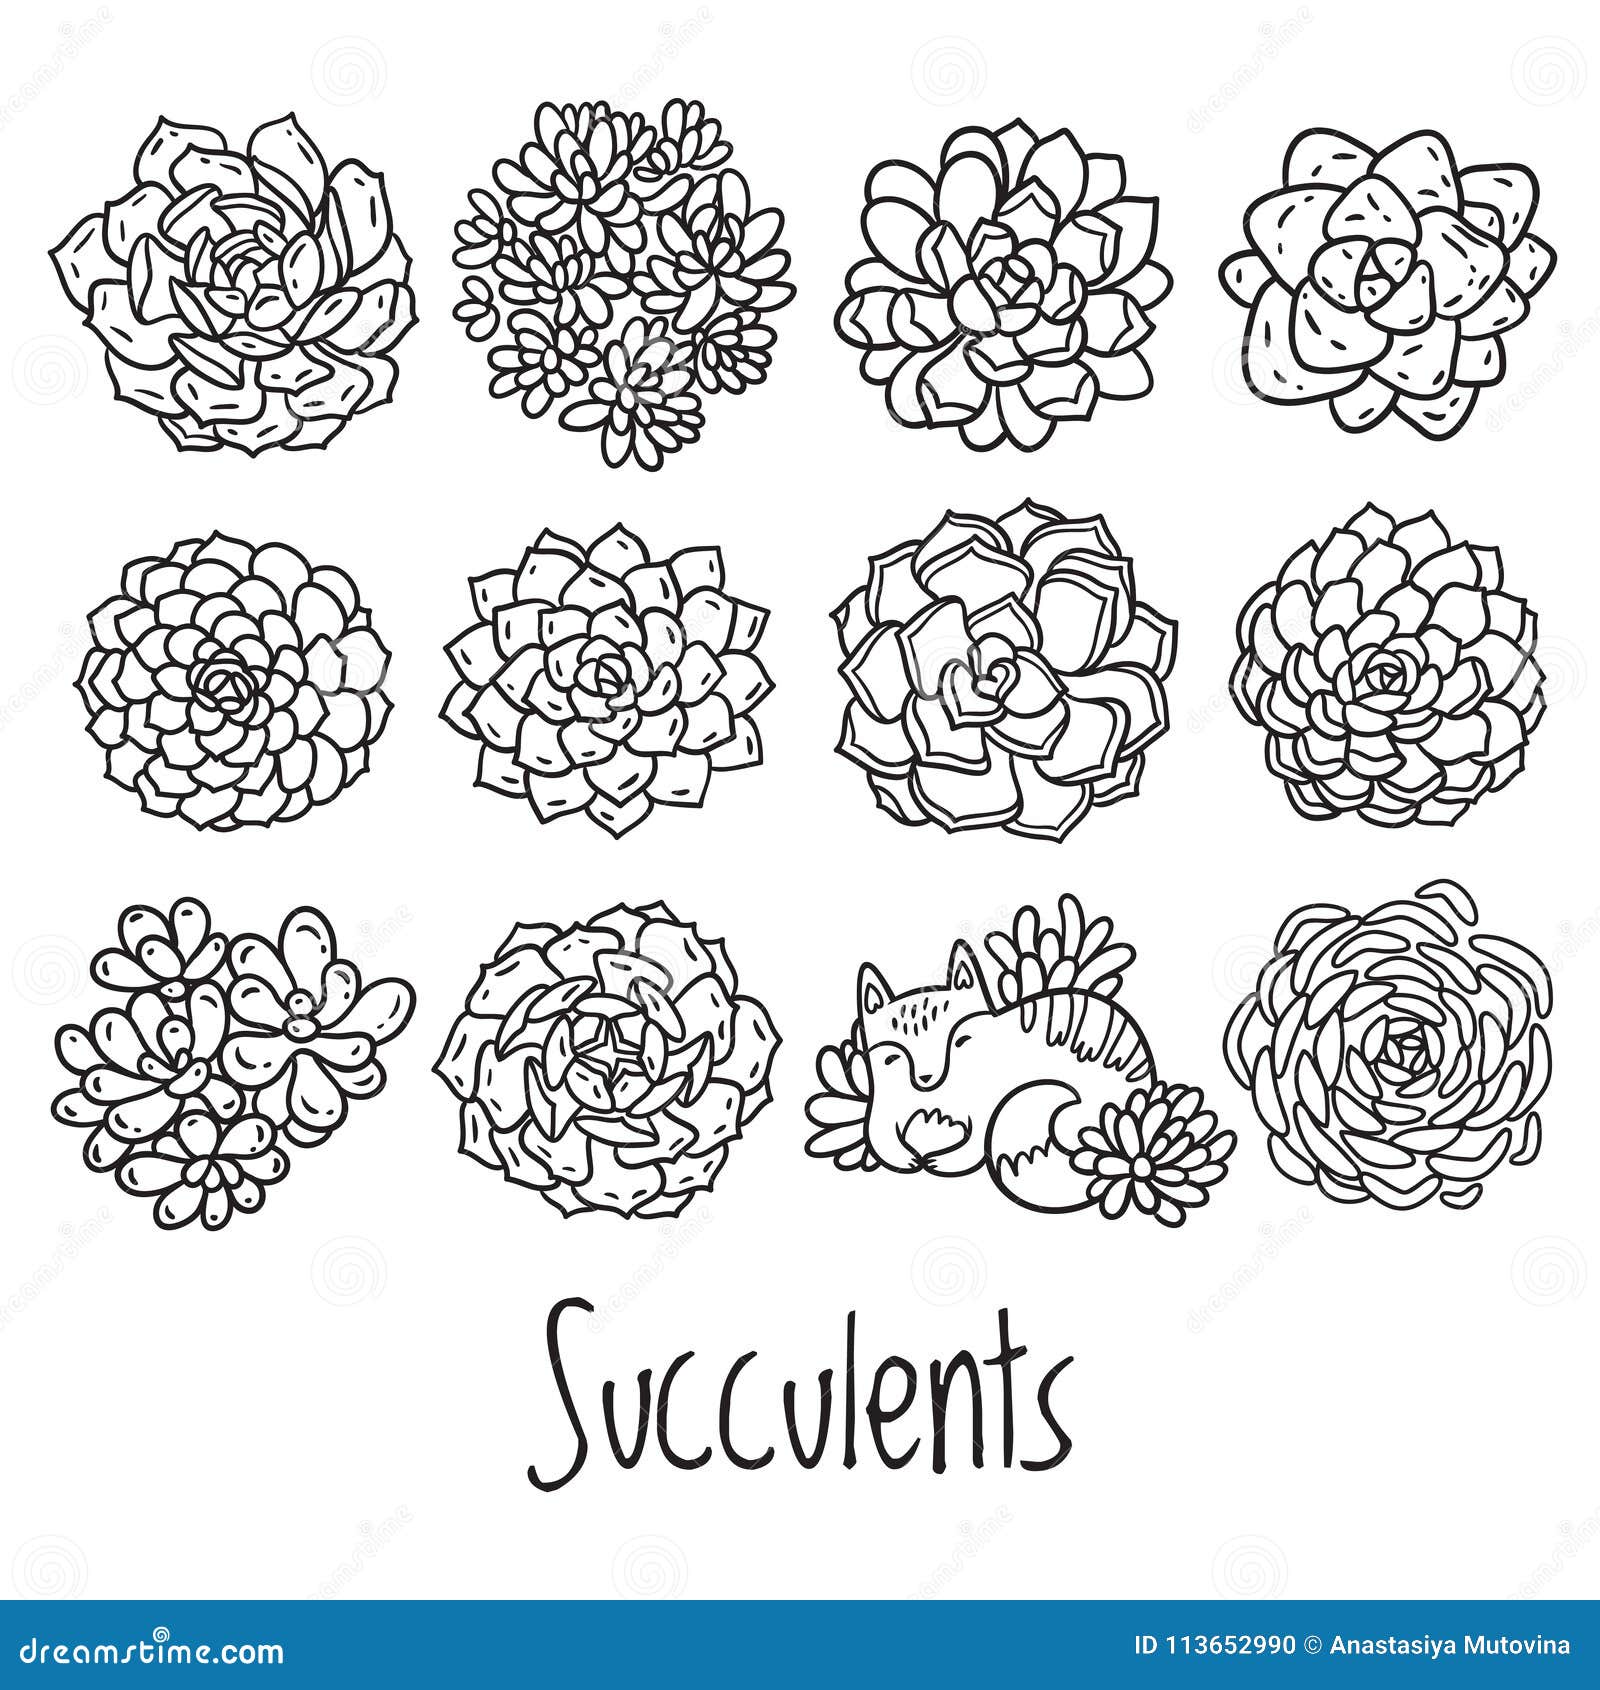 Succulent Outline Design With Cat In Cartoon Style. Ideal For Coloring